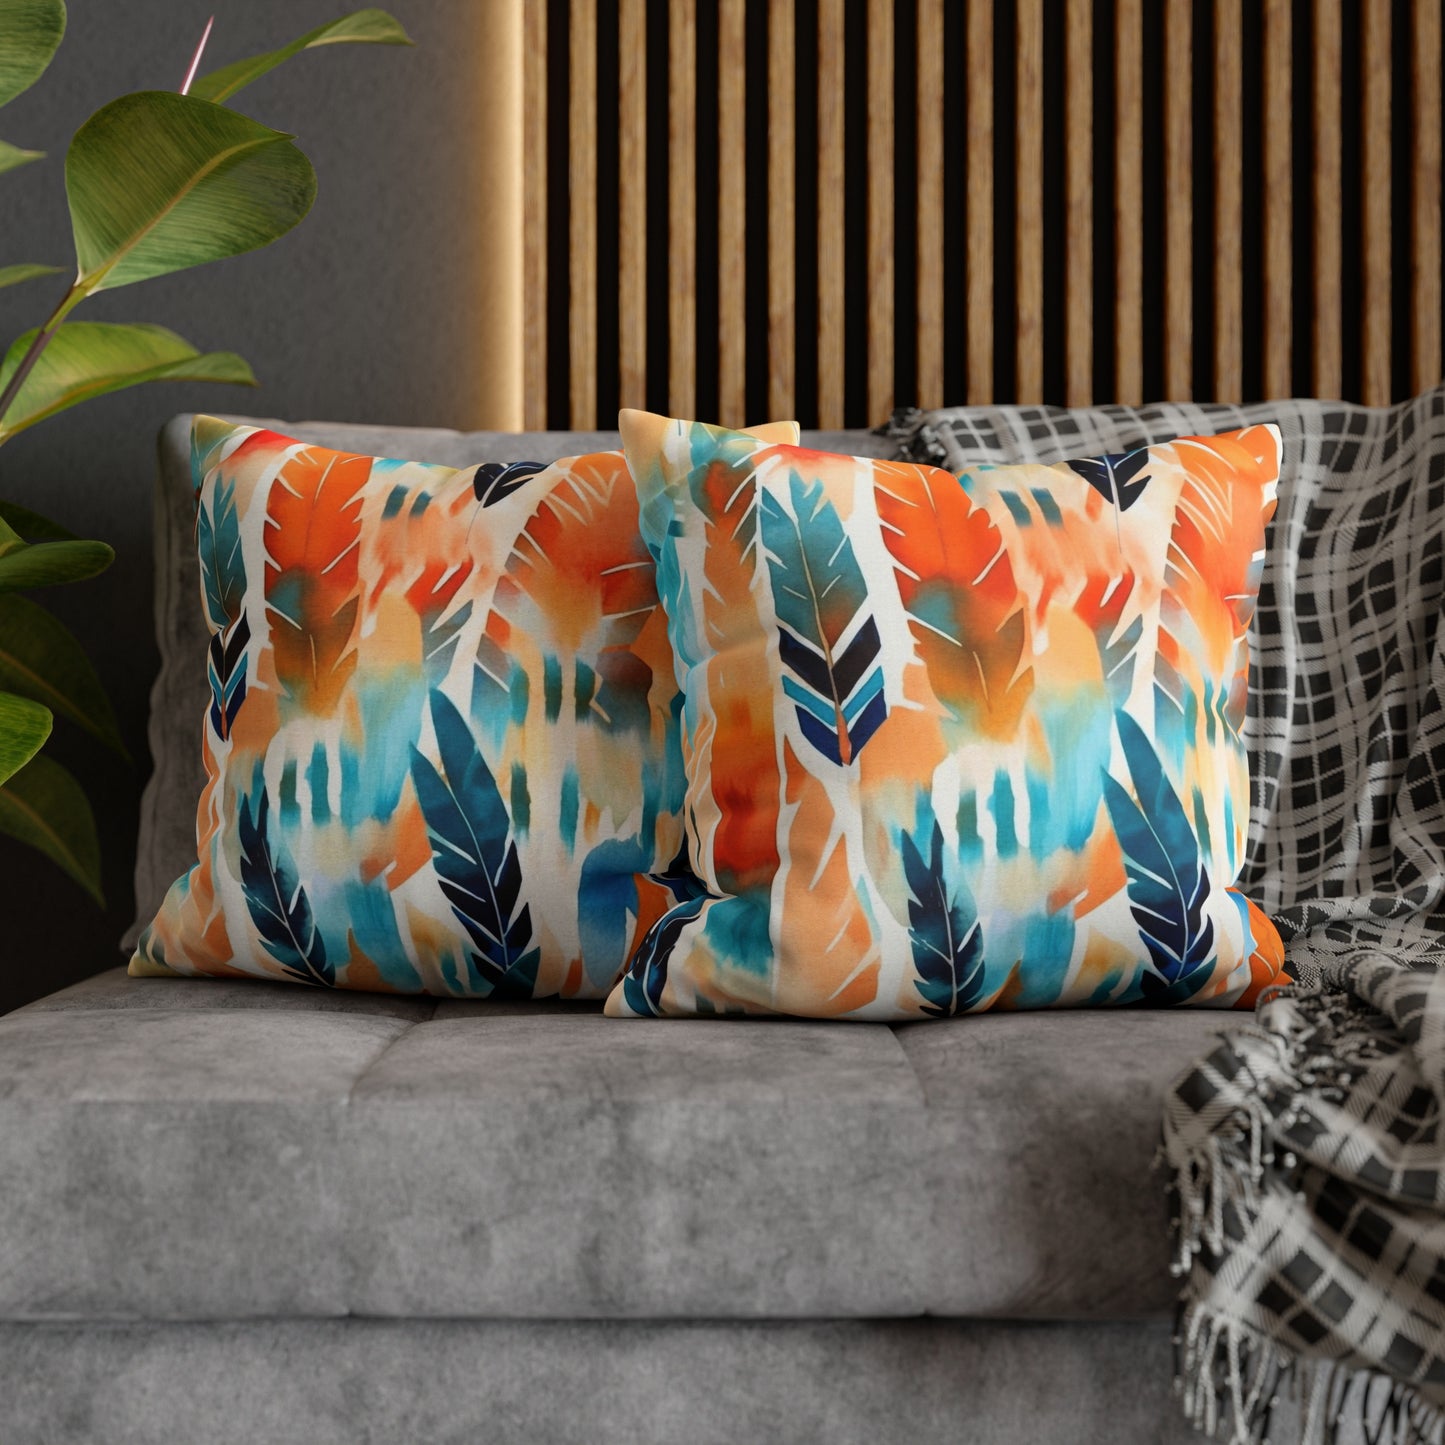 Boho Abstract Floral Throw Pillow Cover (06)